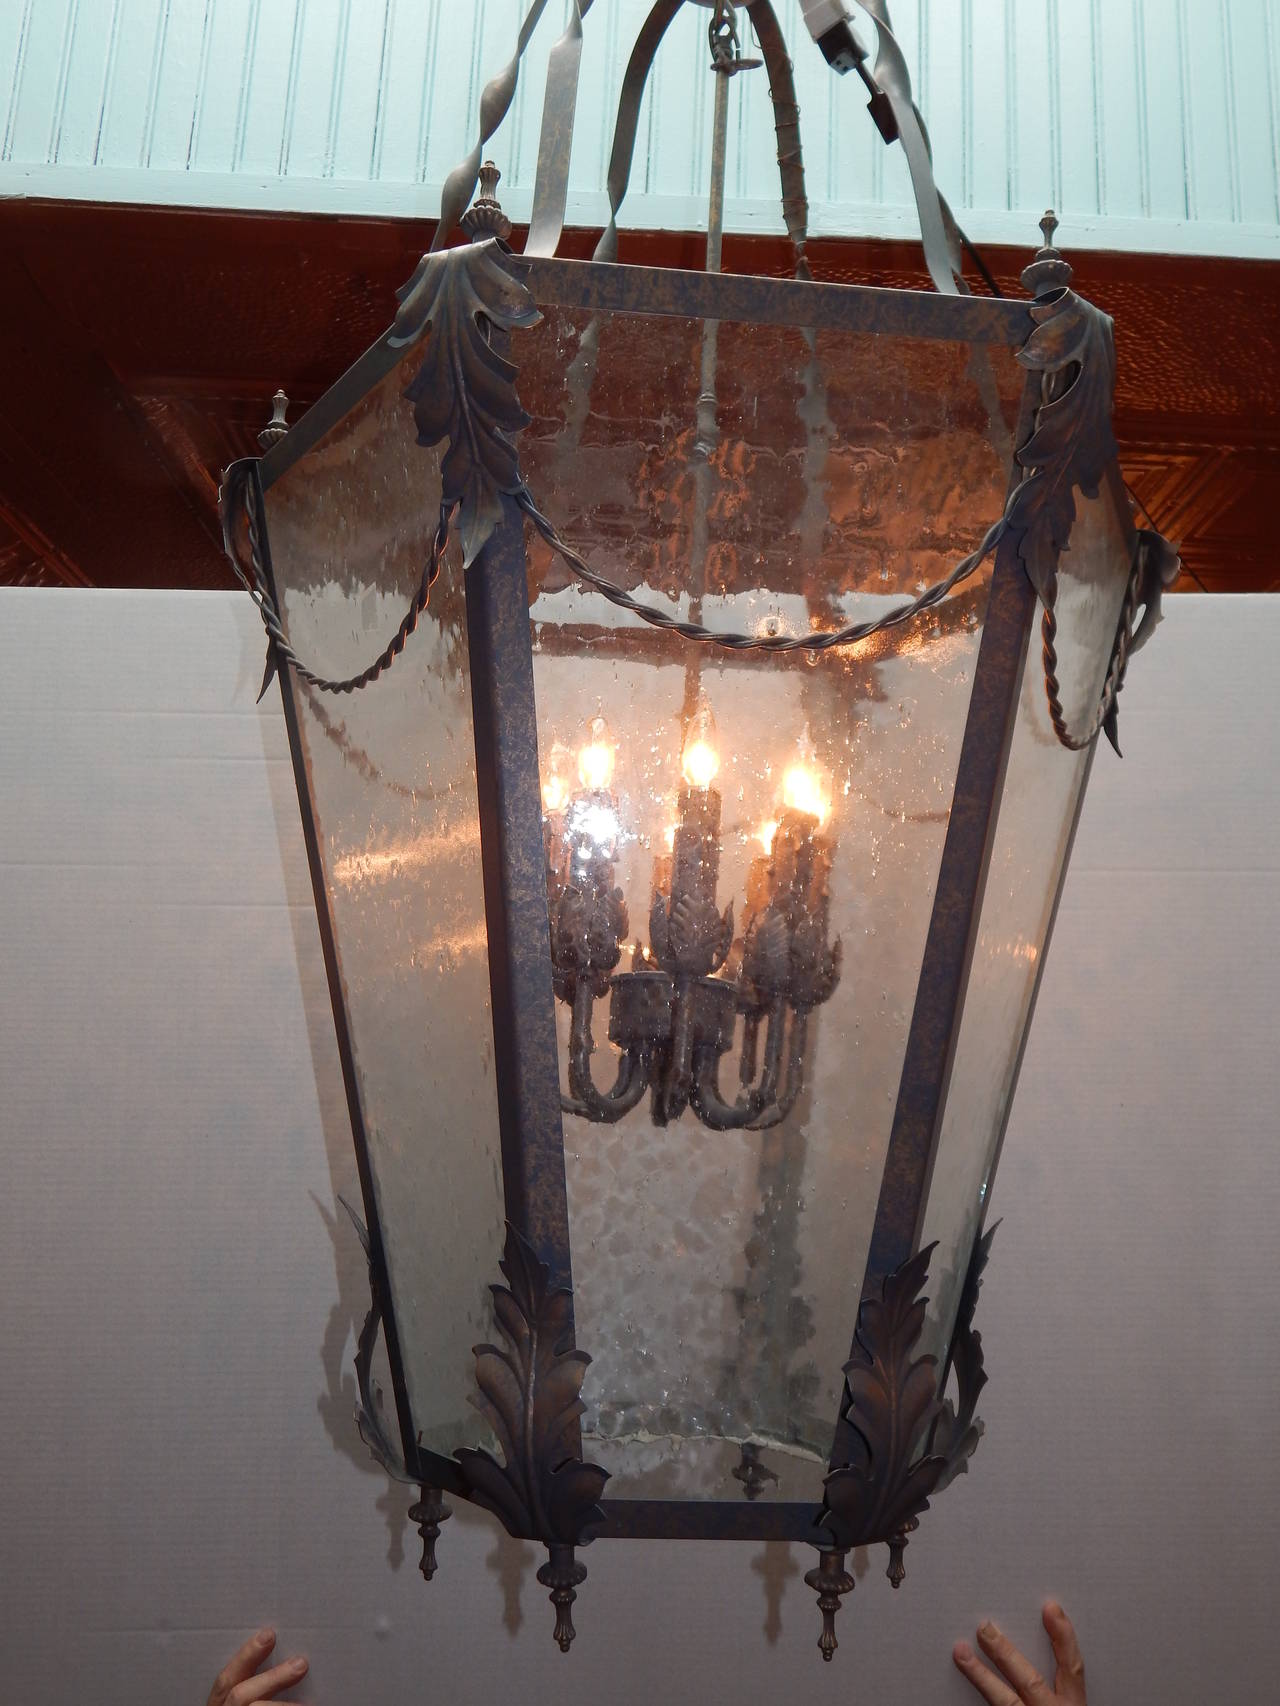 Large Verde Metal lantern, with glass panels made to look 18th century,
having eight interior lights.